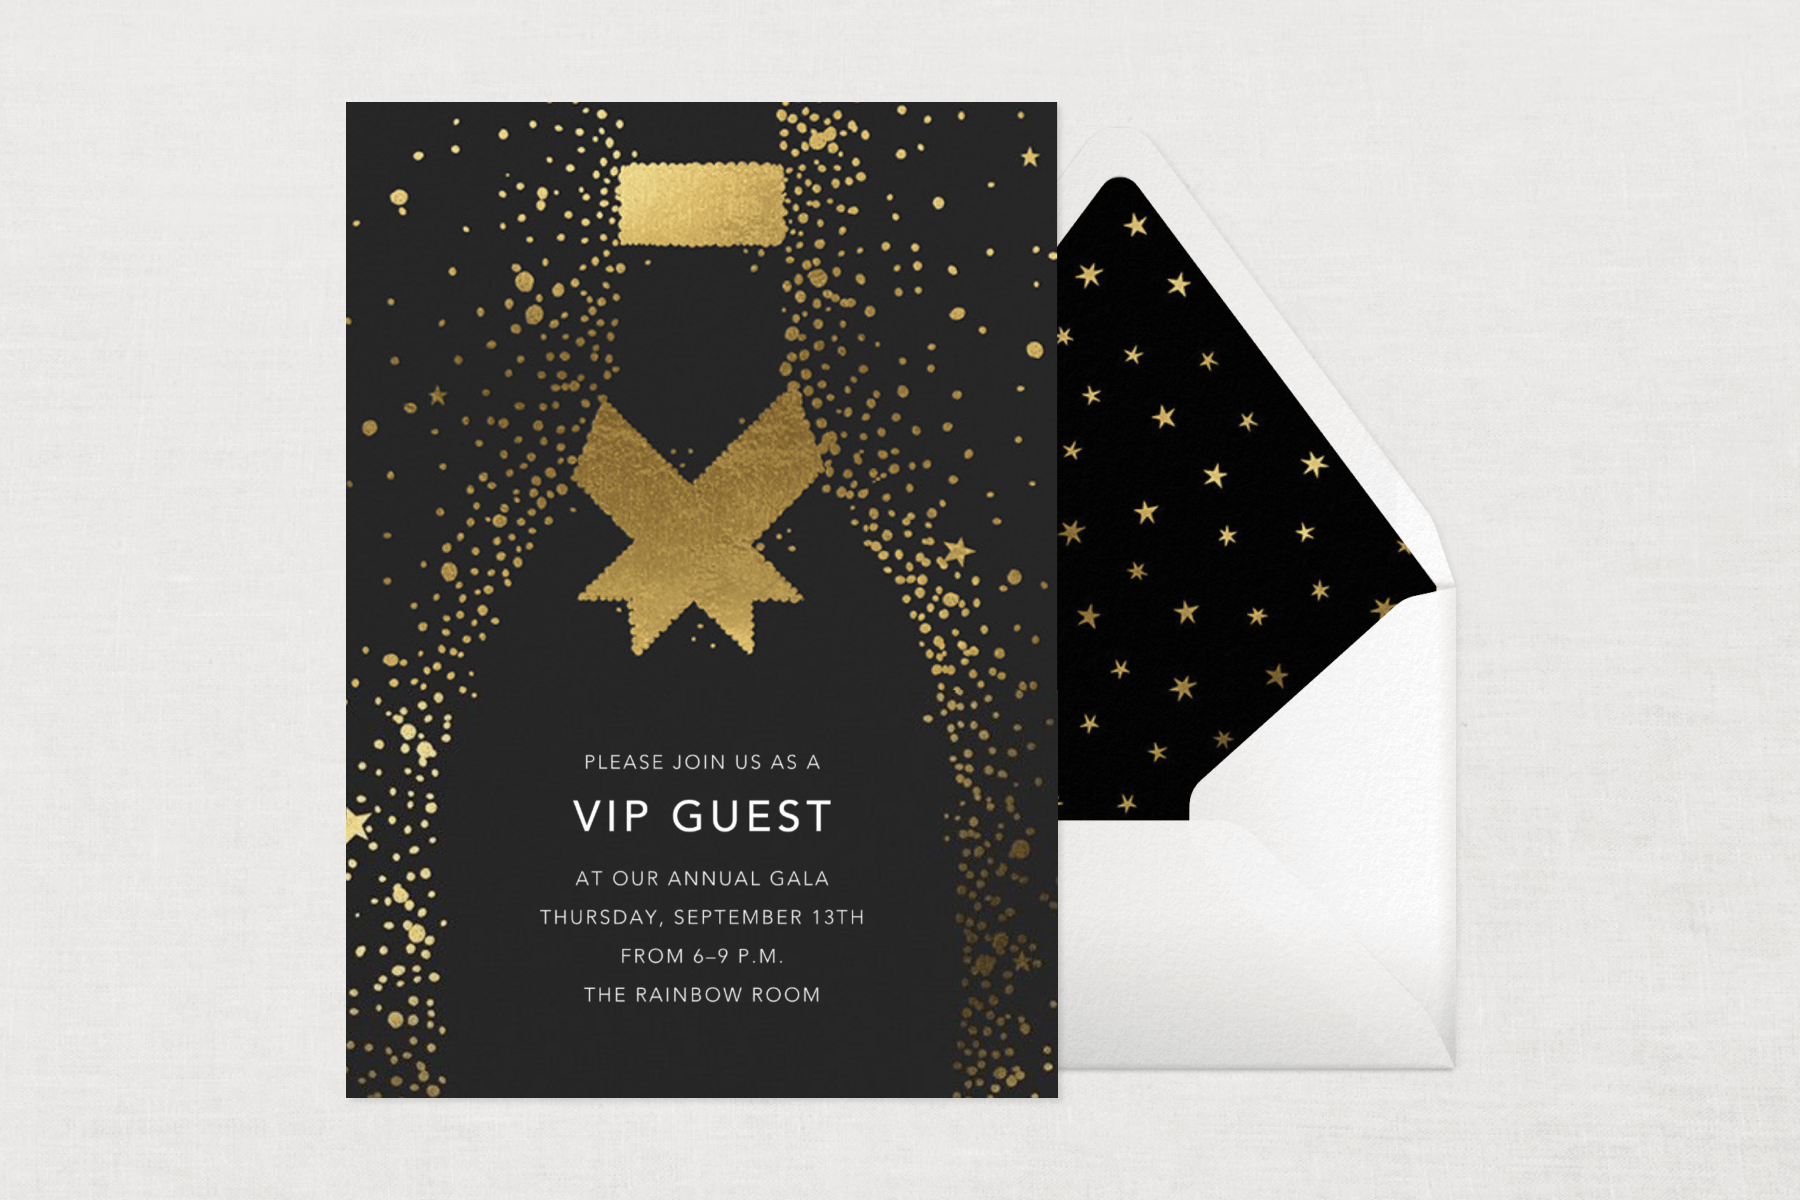 A black invitation to attend an annual gala as a VIP guest has a large Champagne bottle illustration formed abstractly by small gold dots and stars, beside a white envelope with a black liner and gold stars.